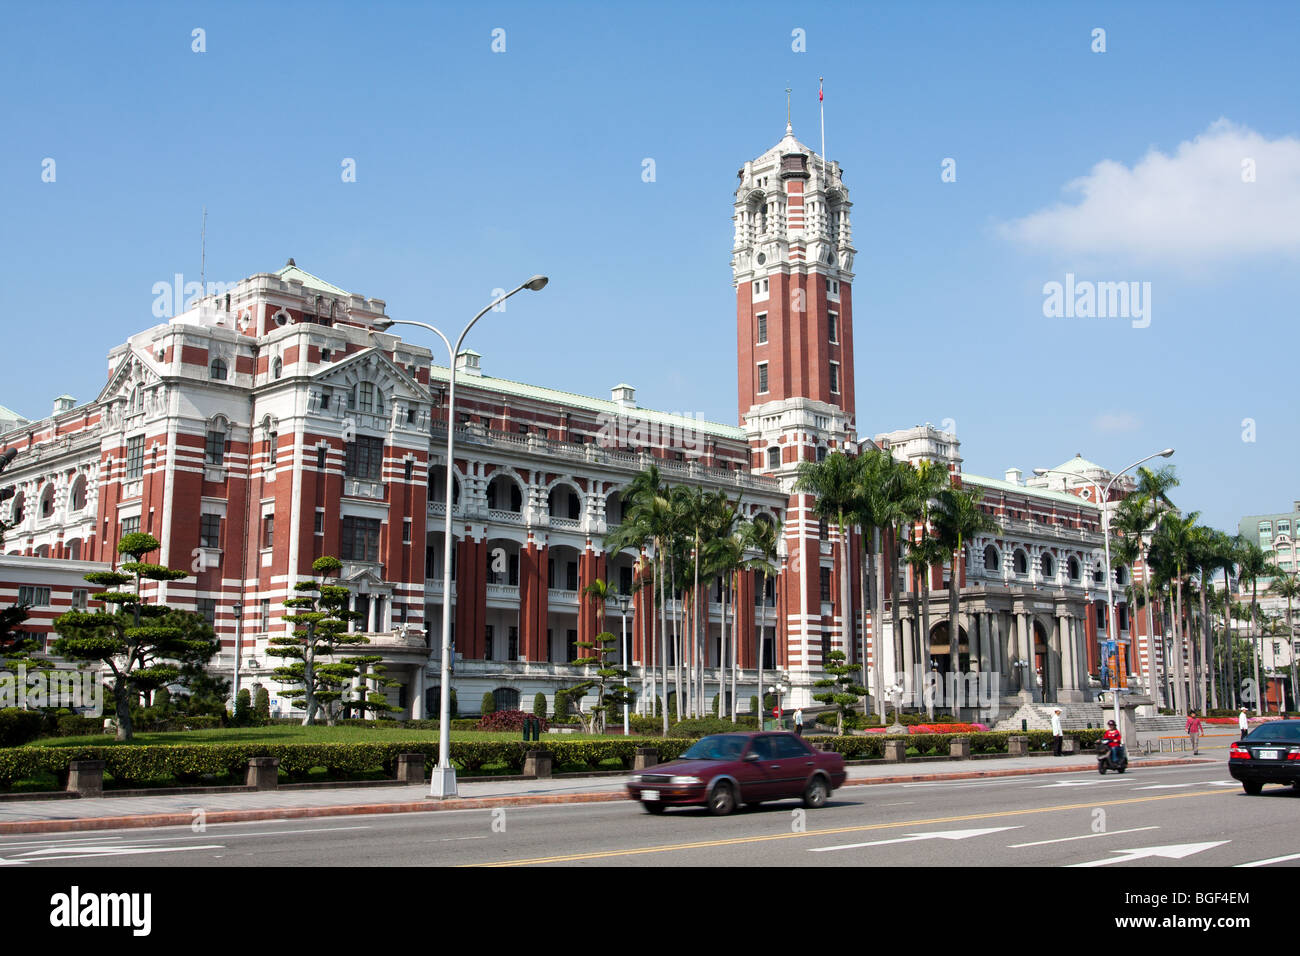 Presidential Office Building facade, Office of the President of the Republic of China, Ketagalan Blvd, Zhongzheng District, Taipei City, Taiwan Stock Photo